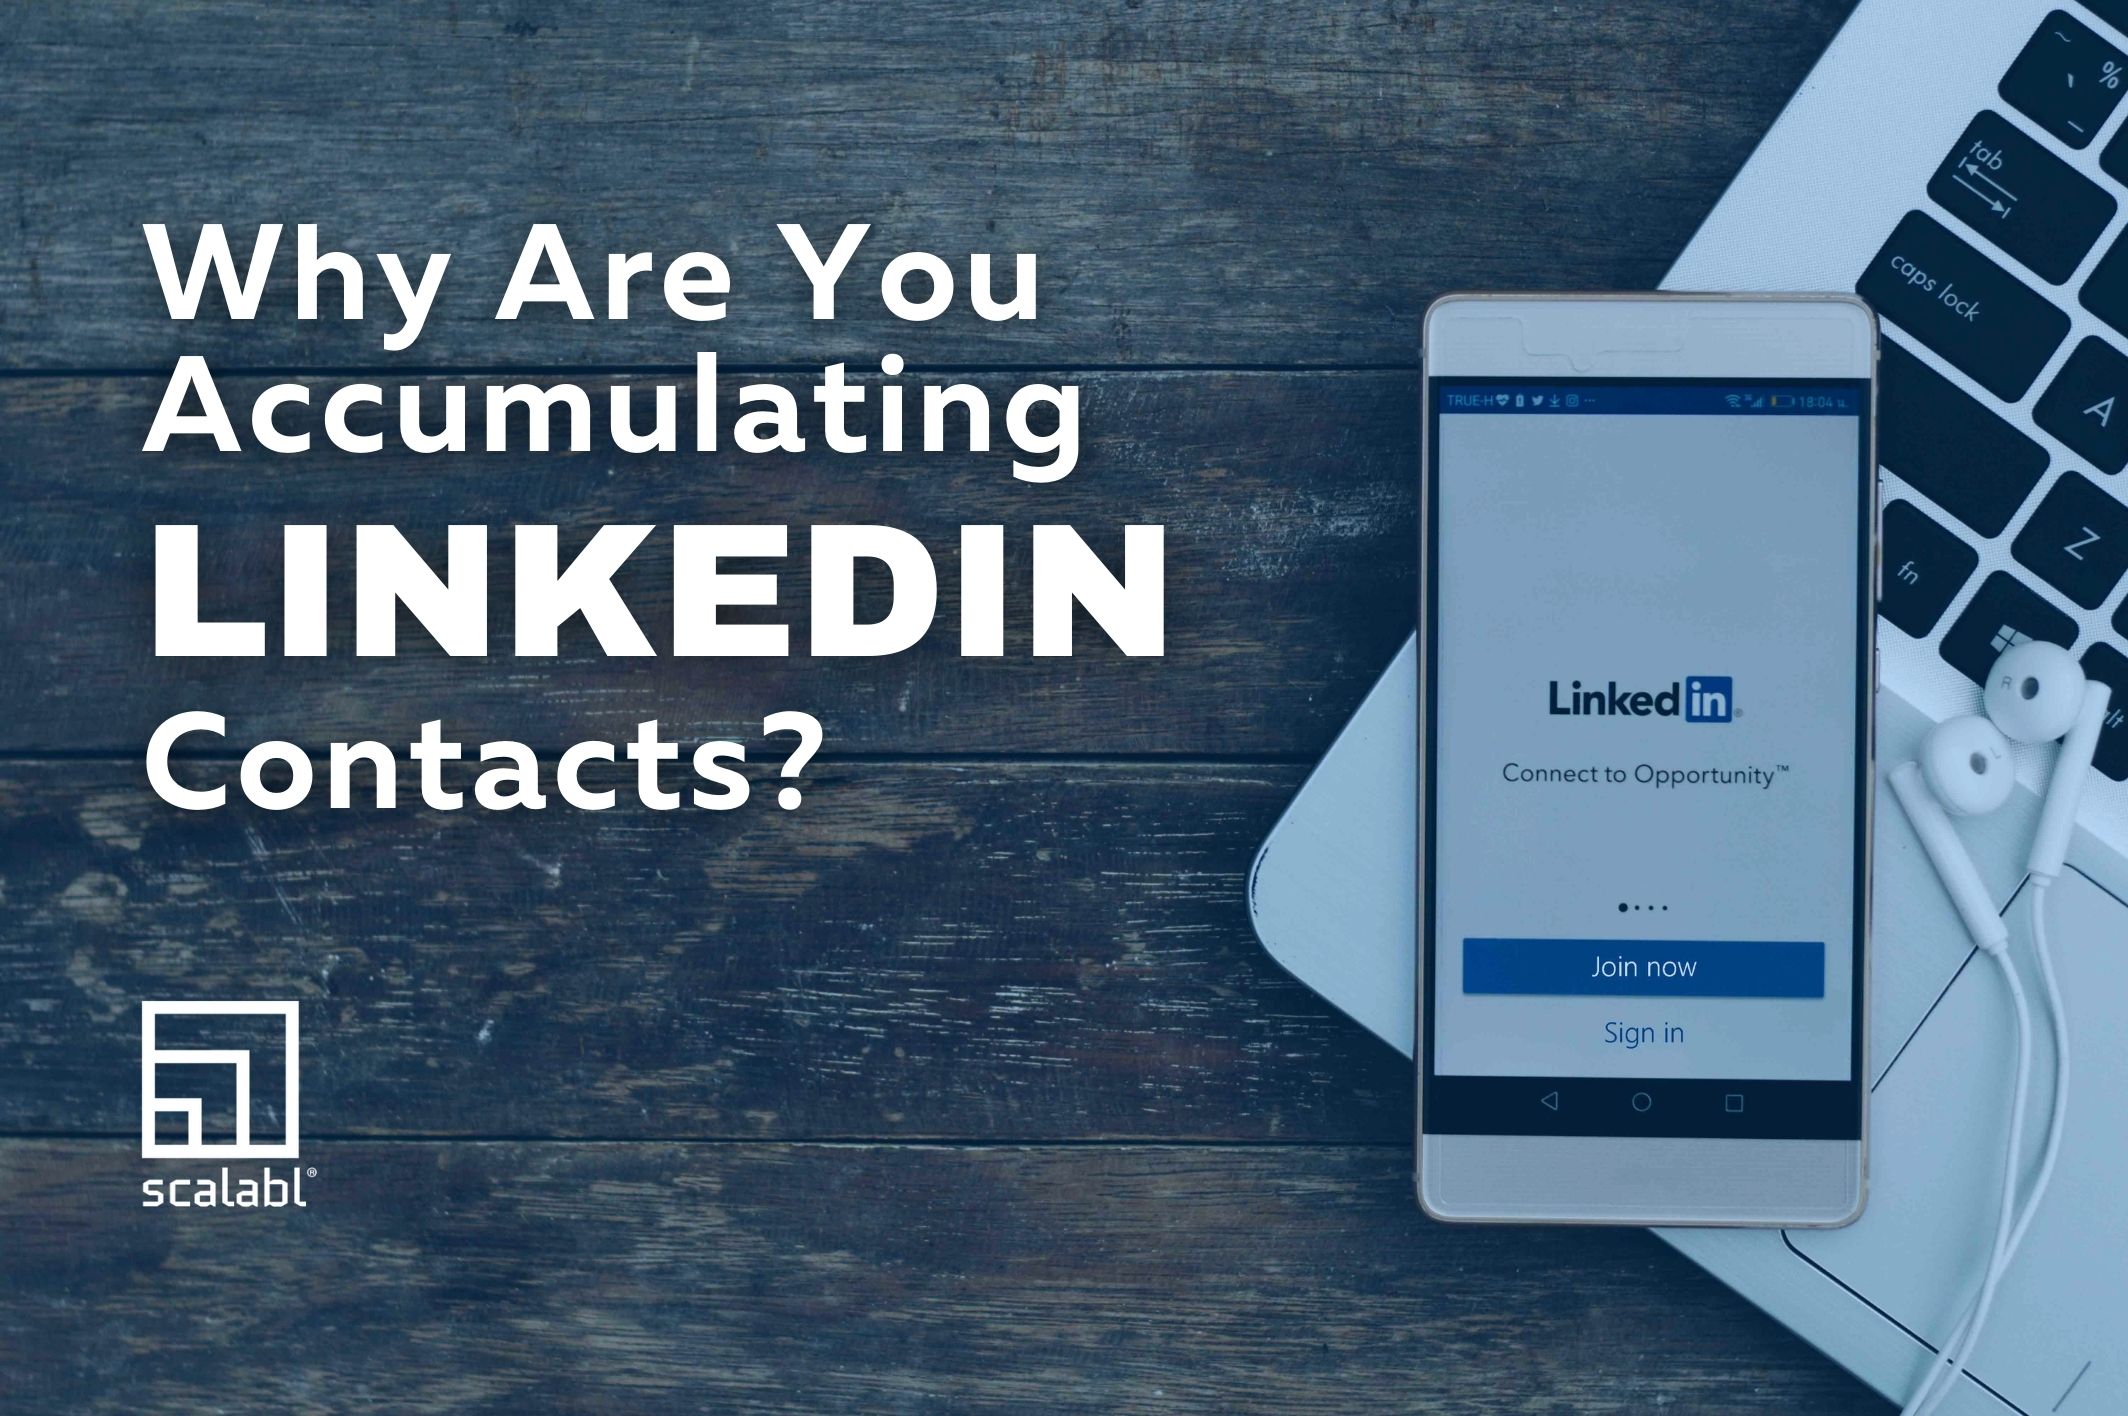 Why You Are Accumulating LinkedIn Contacts?